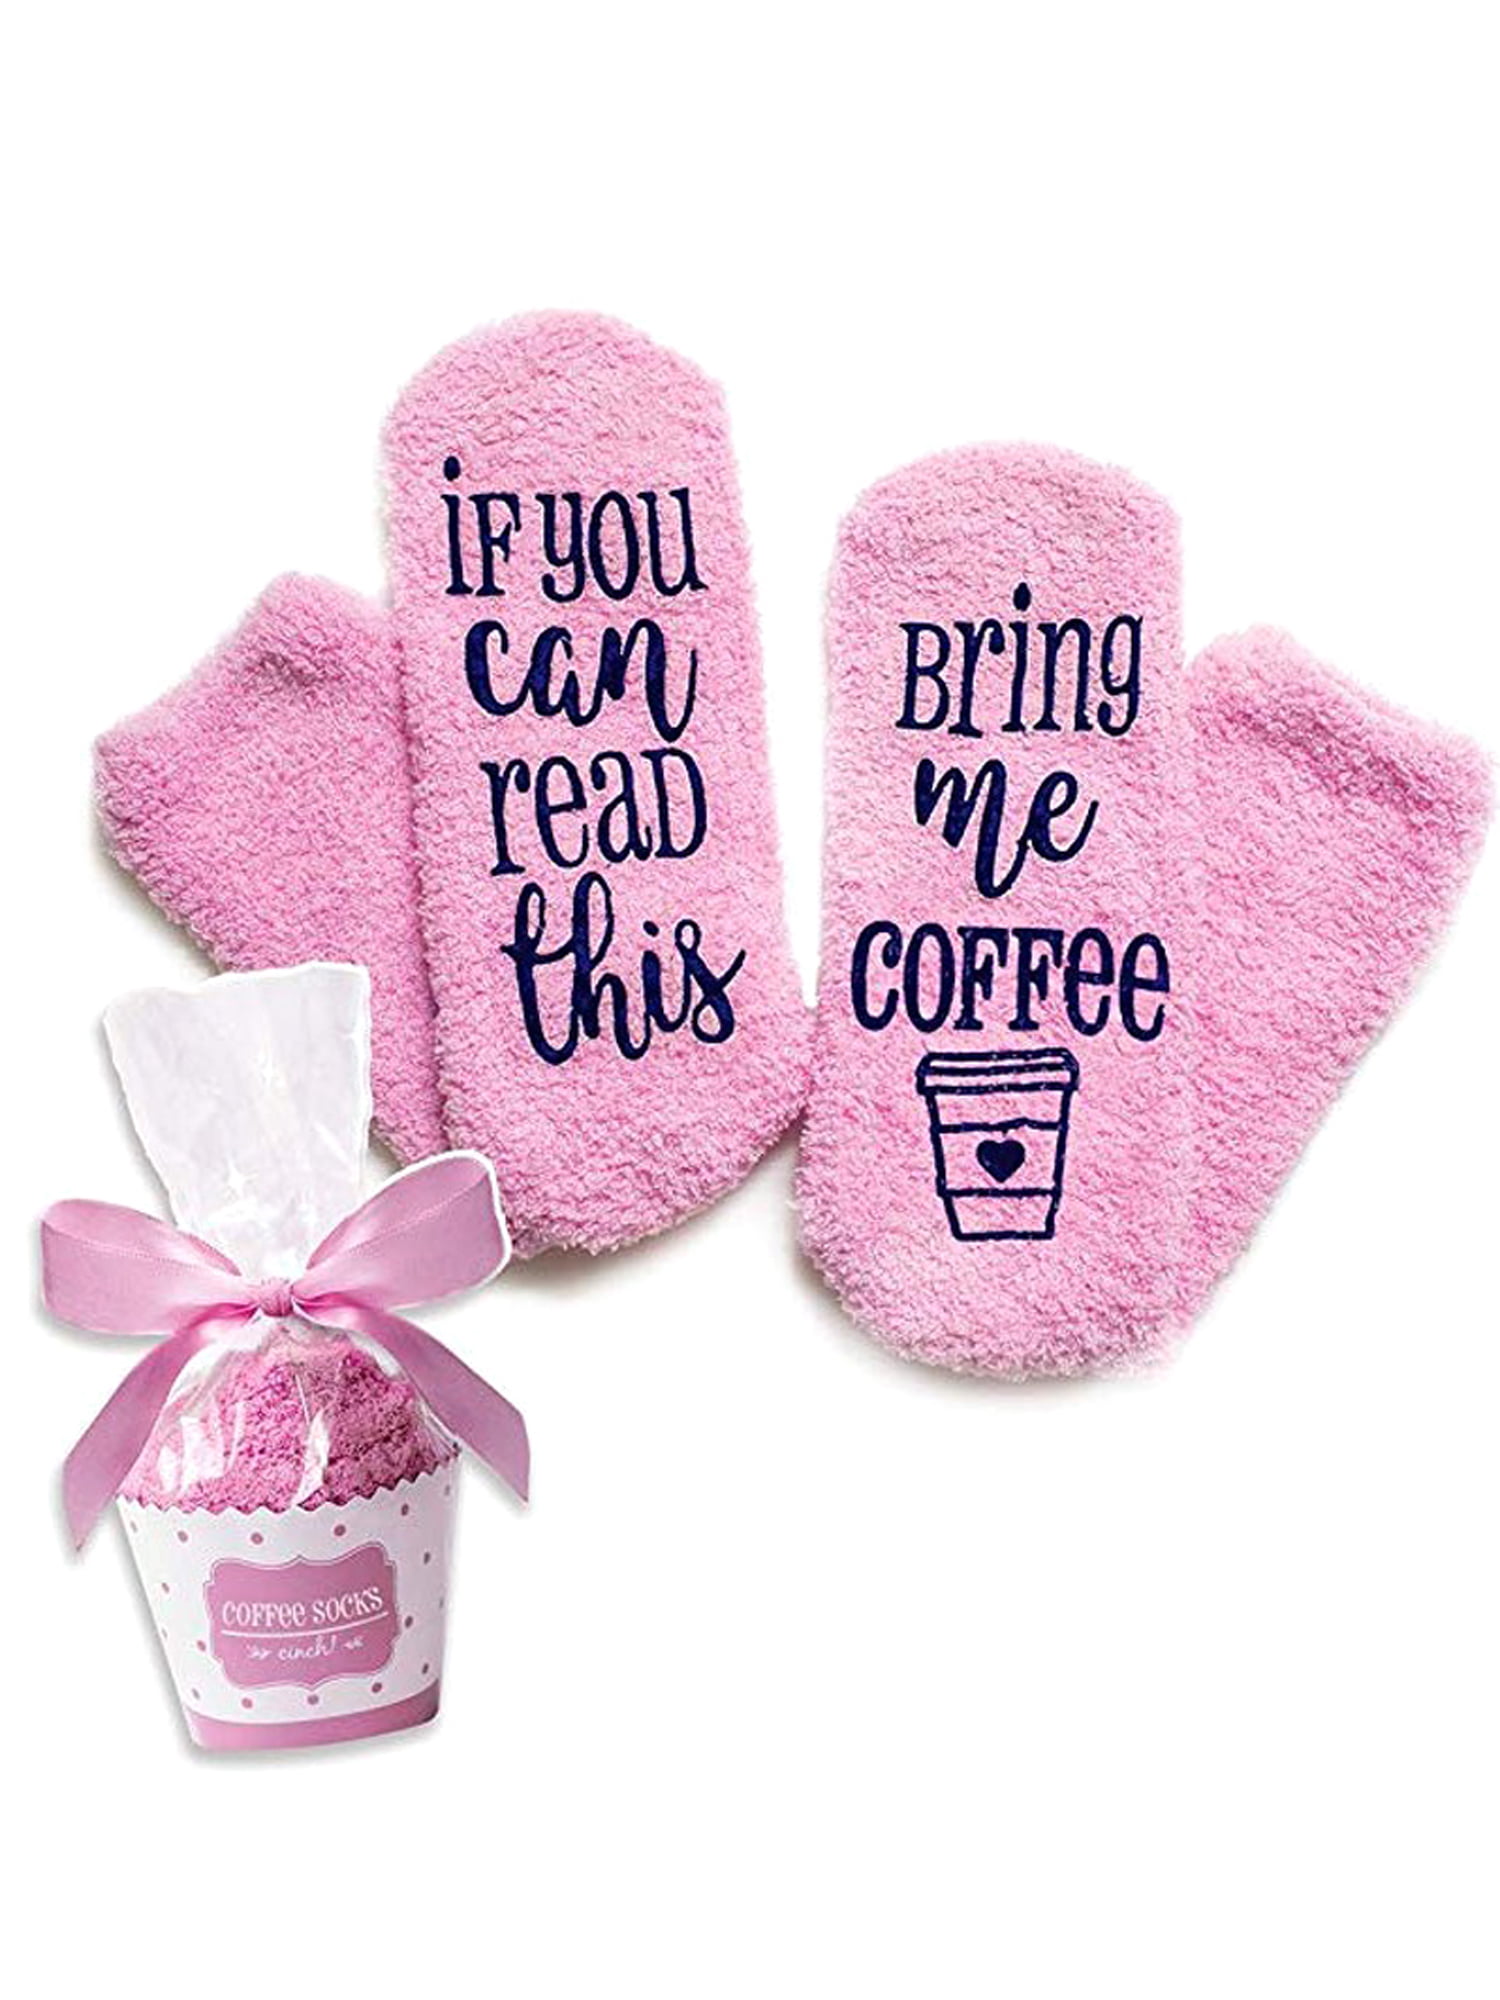 Bring Me Some Weed Spring Decor If you Can Read This Gift for Her or Him, Custom Funny Socks With Sayings Top Selling Item 